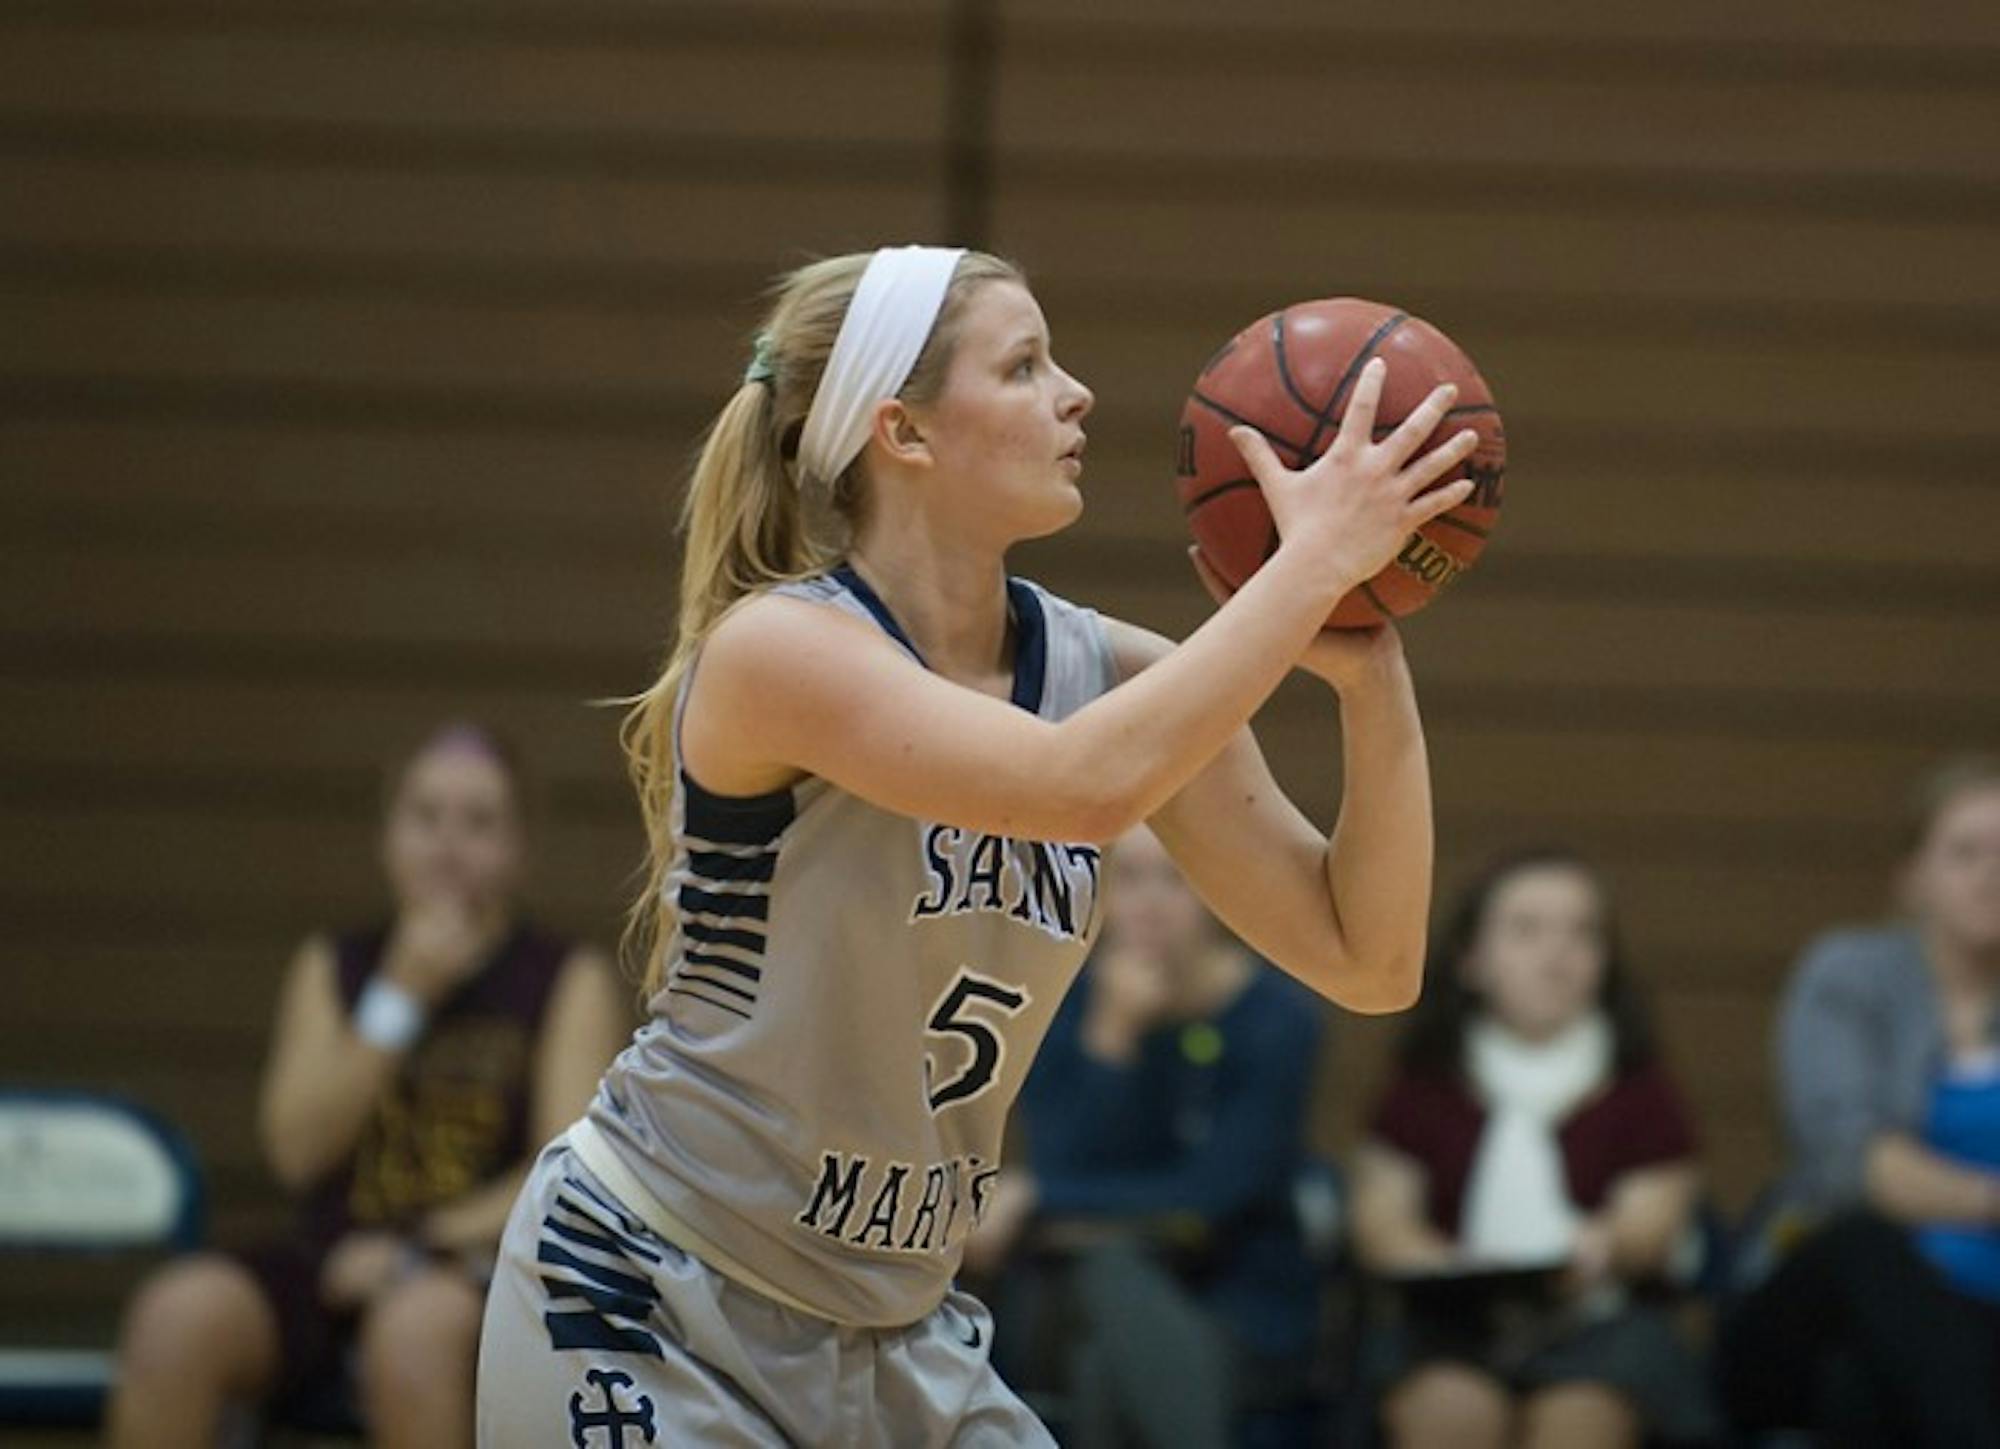 Belles freshman guard Timoney Moyer lines up a shot during Saint Mary’s 95-68 loss to Calvin on Jan. 15.